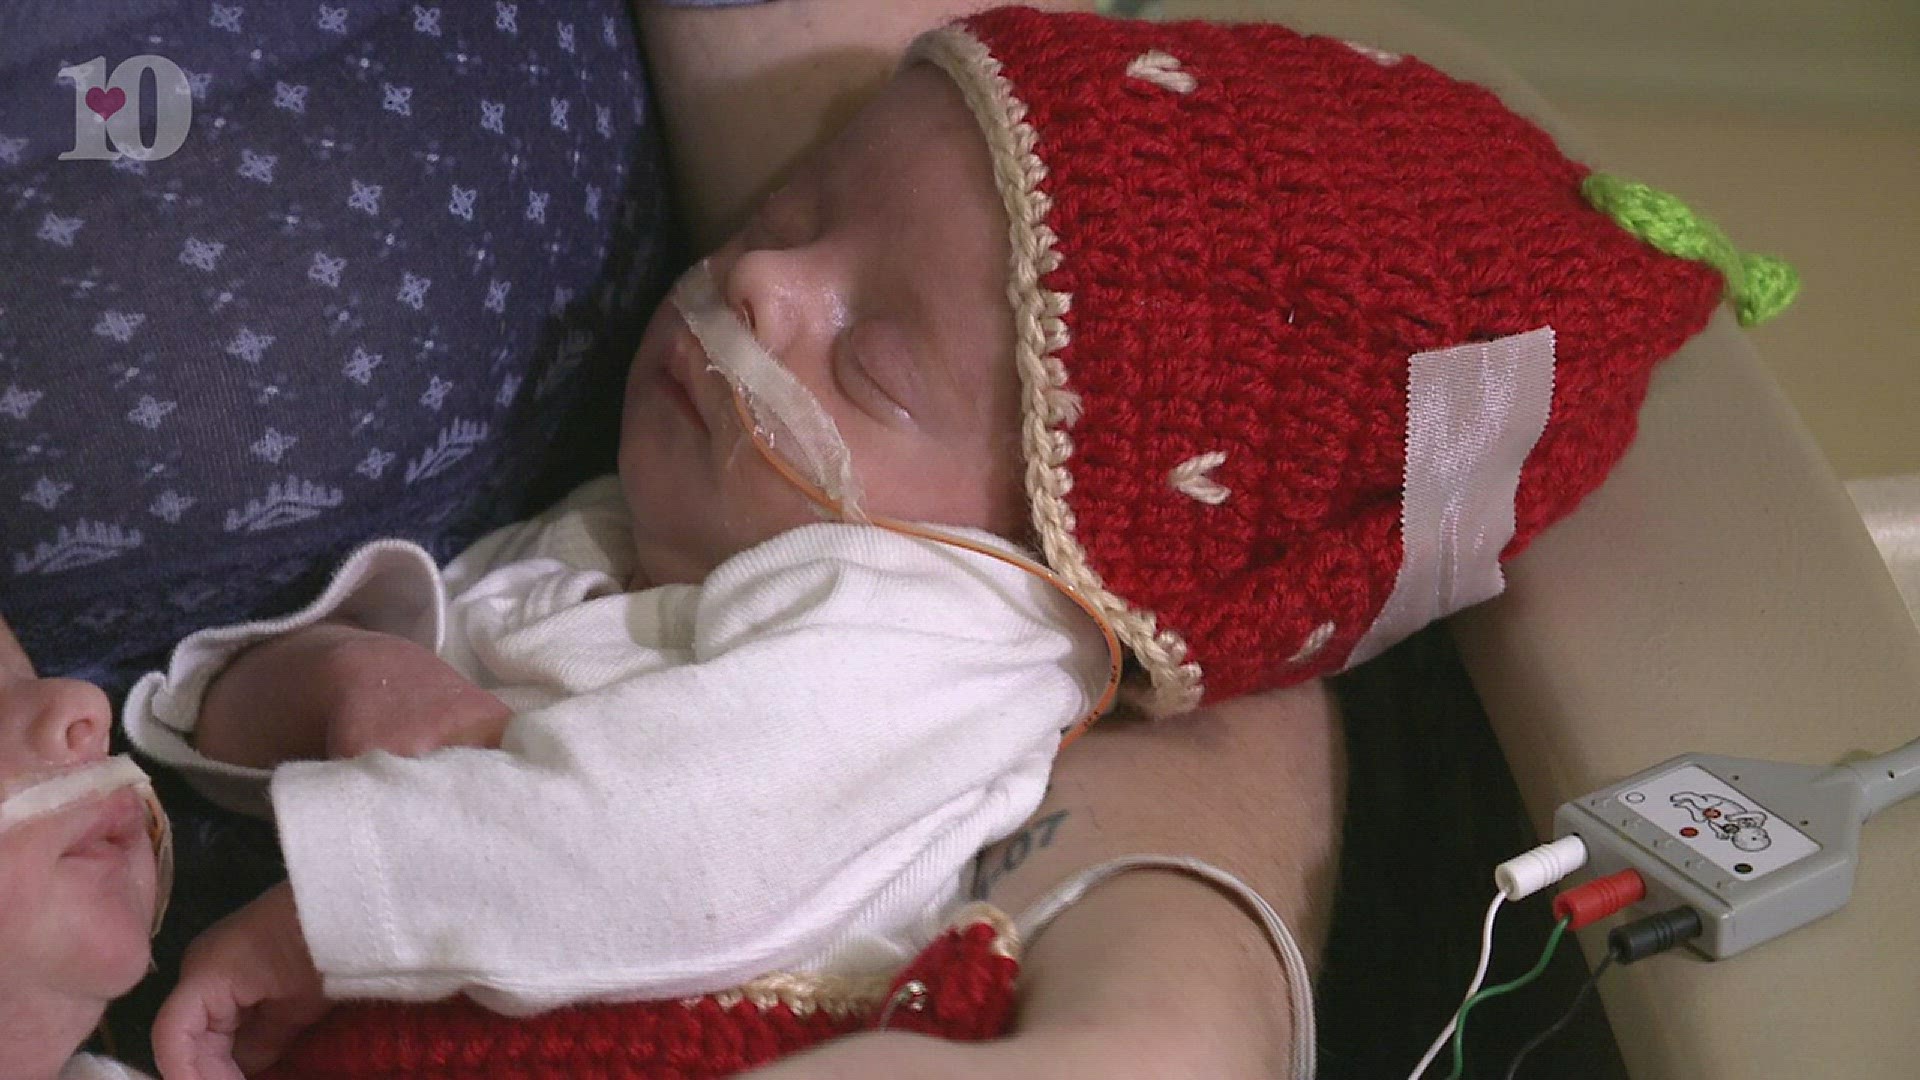 At UT Medical Center's NICU, the little patients are all dressed up for Halloween.